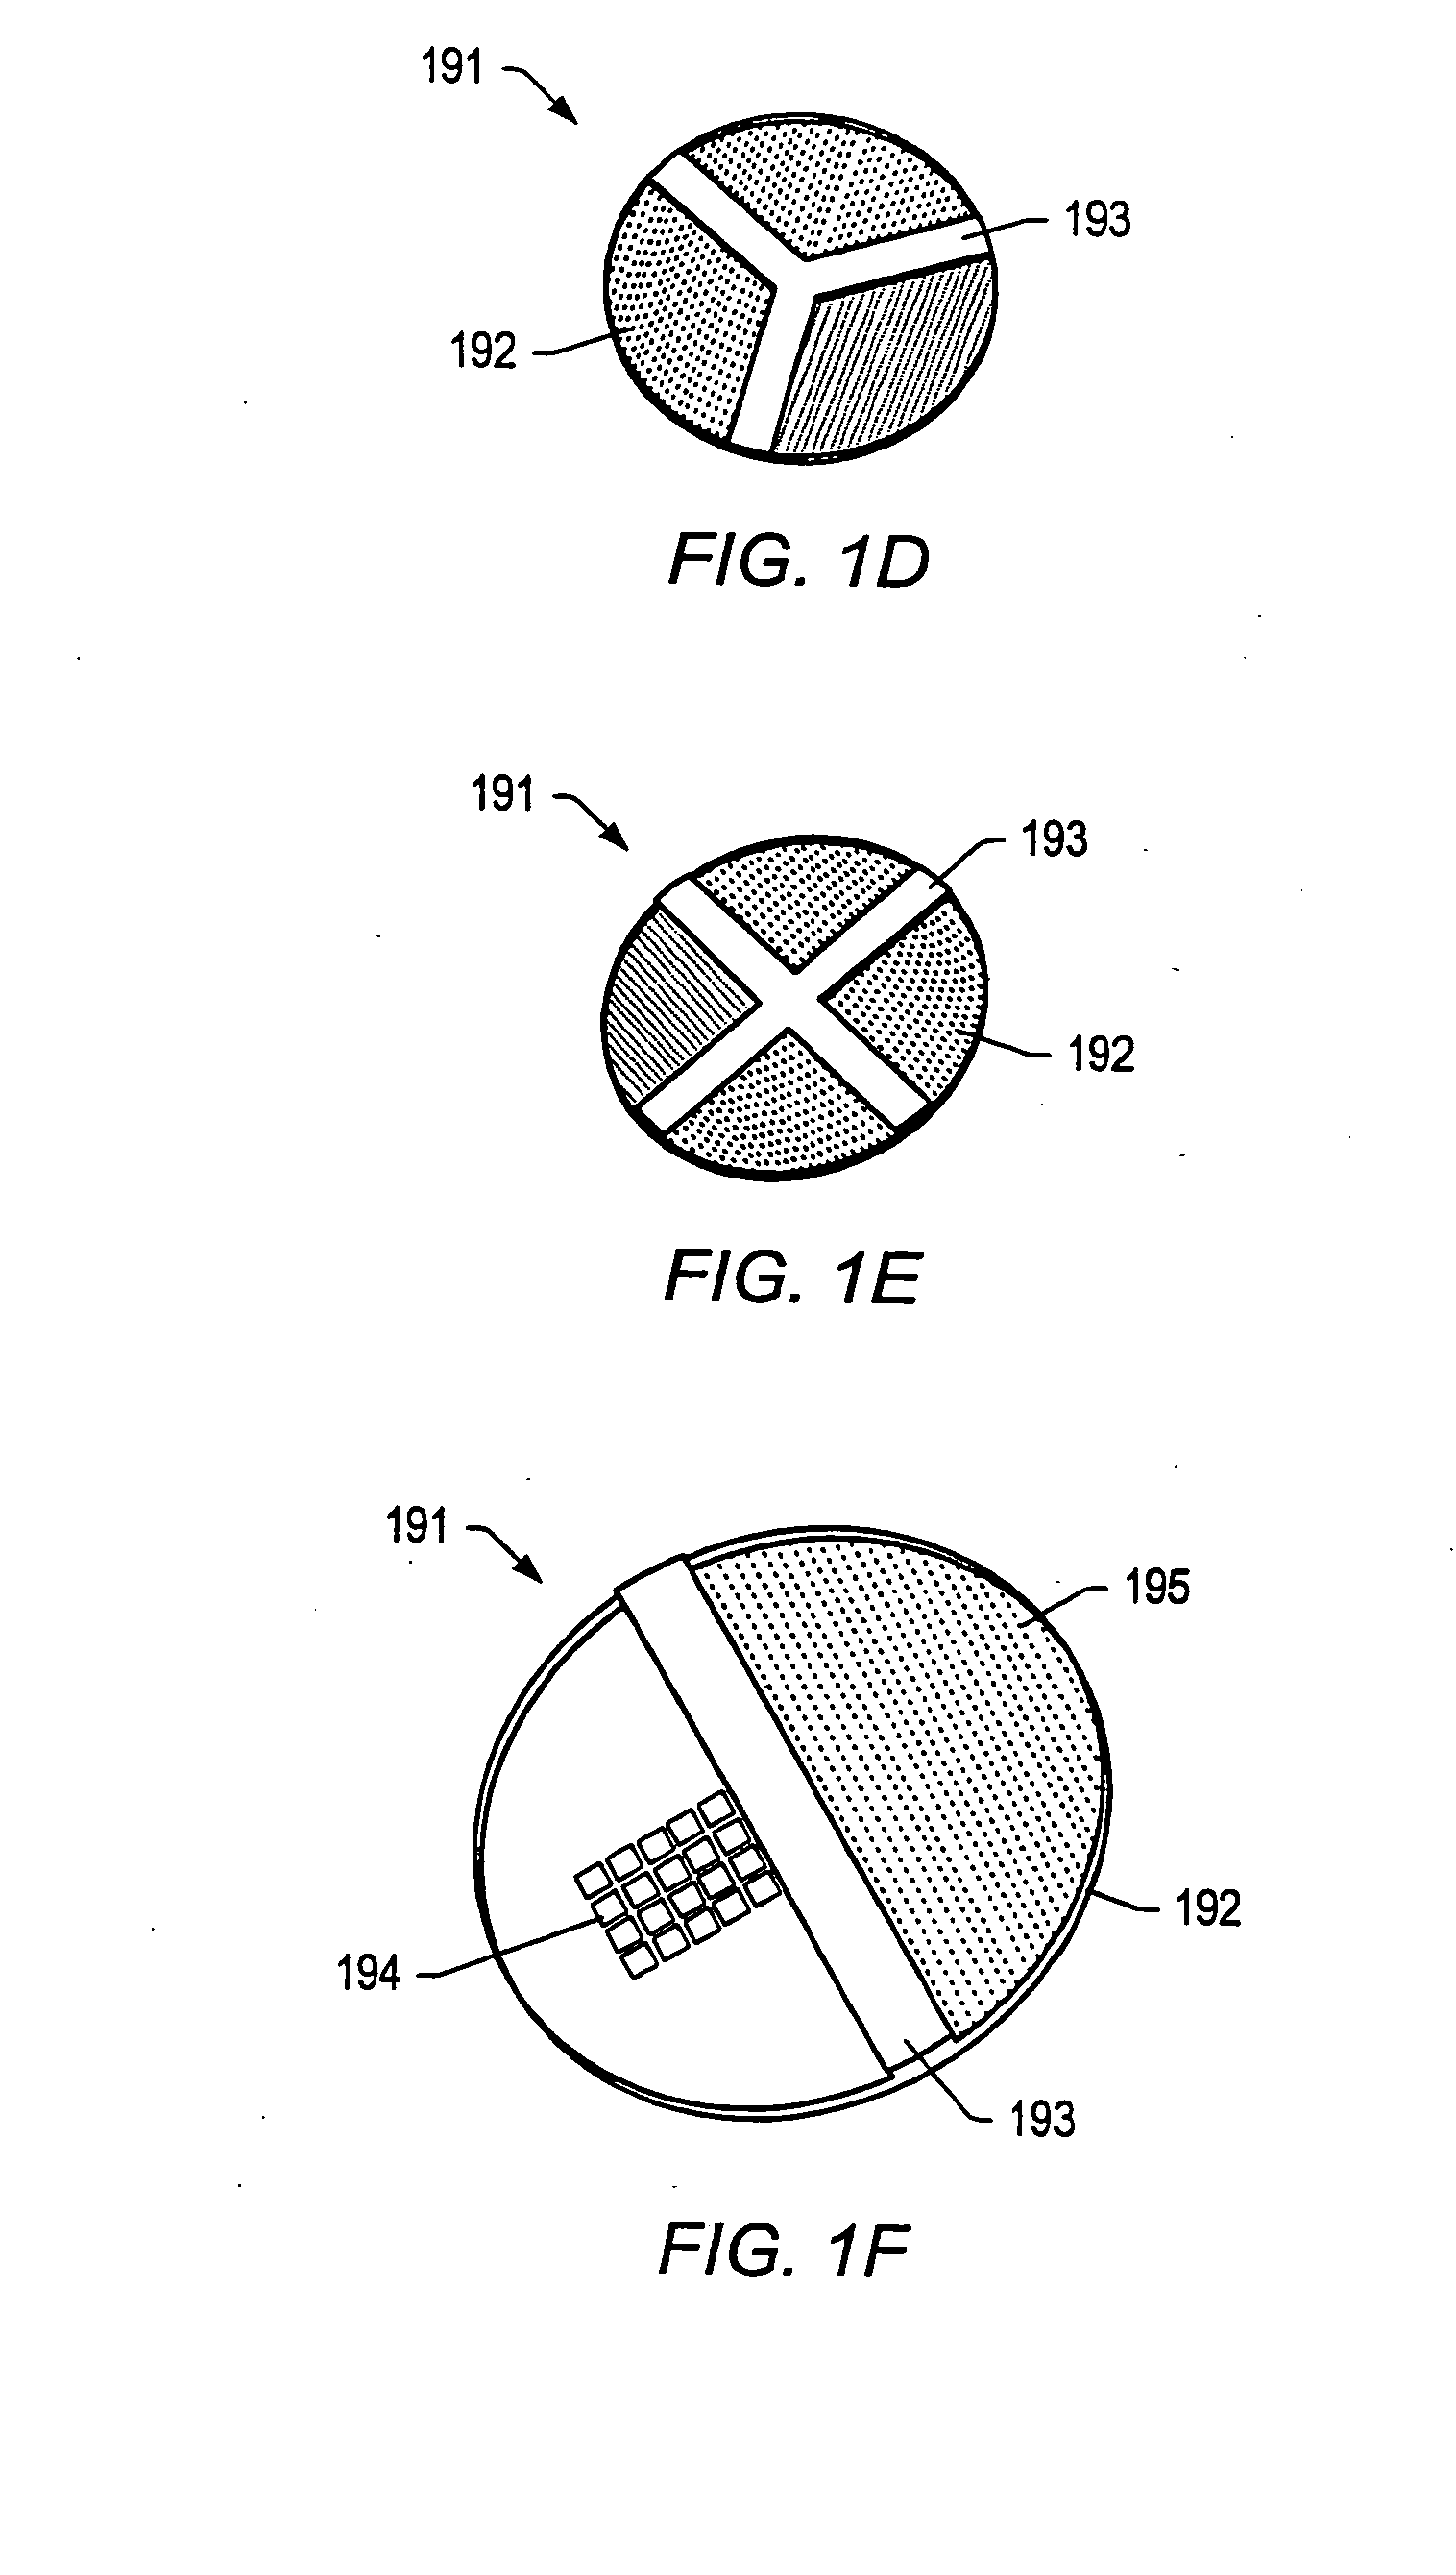 Integration of fluids and reagents into self-contained cartridges containing particle-based sensor elements and membrane-based sensor elements